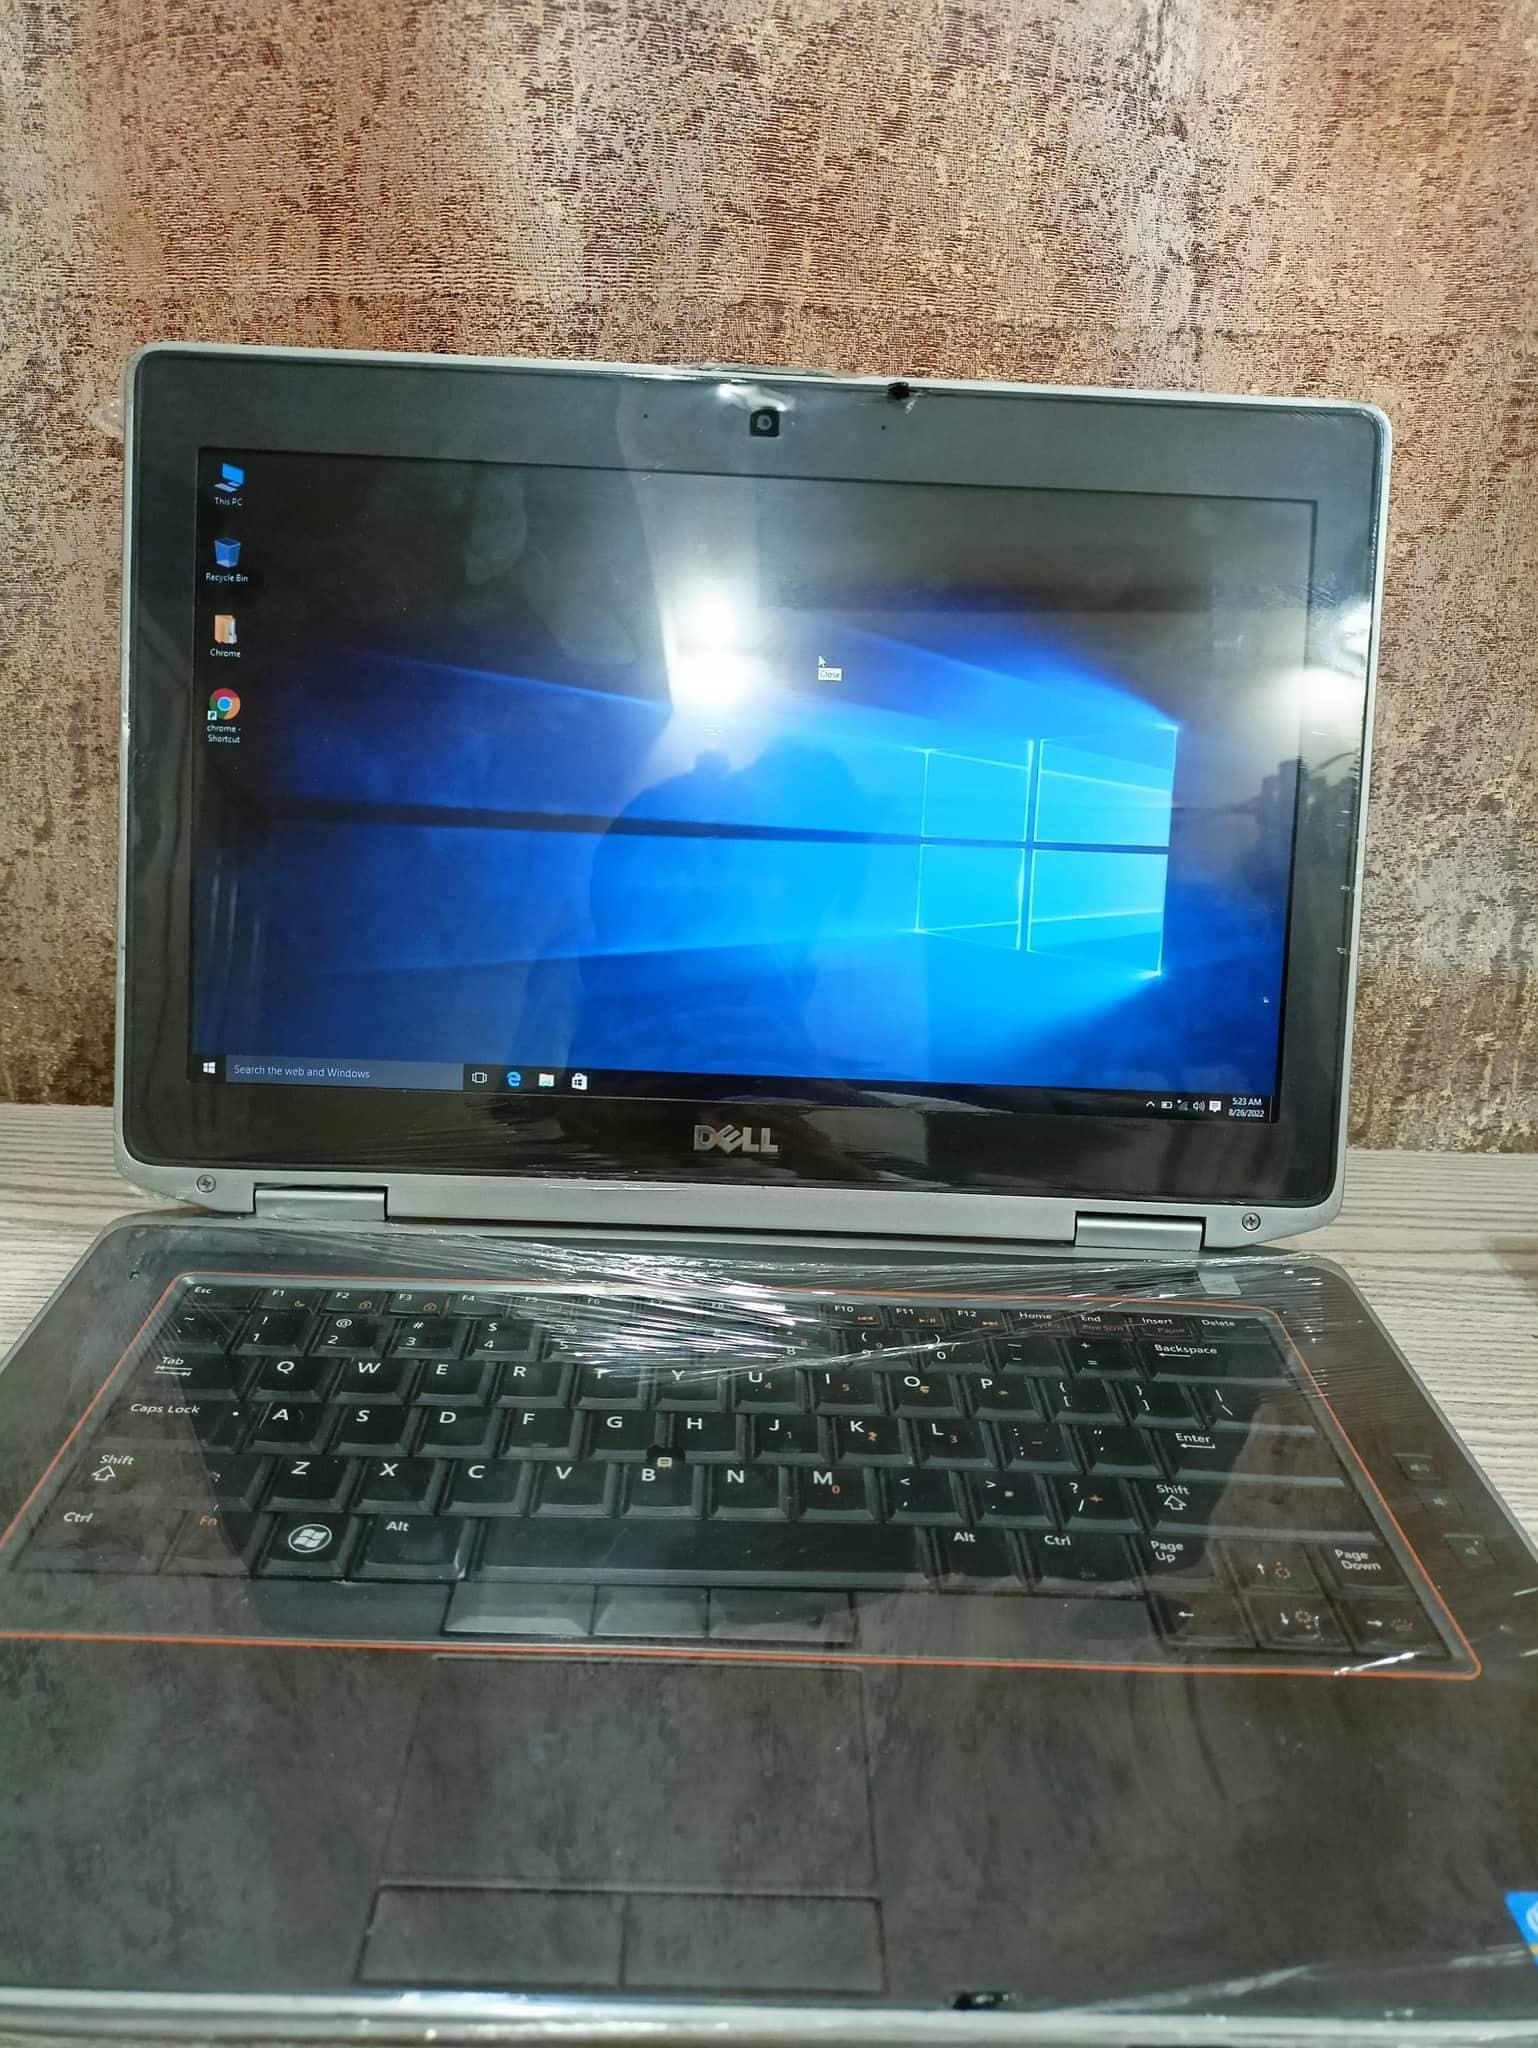 Dell Latitude E6410 Core i5 1st Generation Fancy Look Fast Awesome Laptop